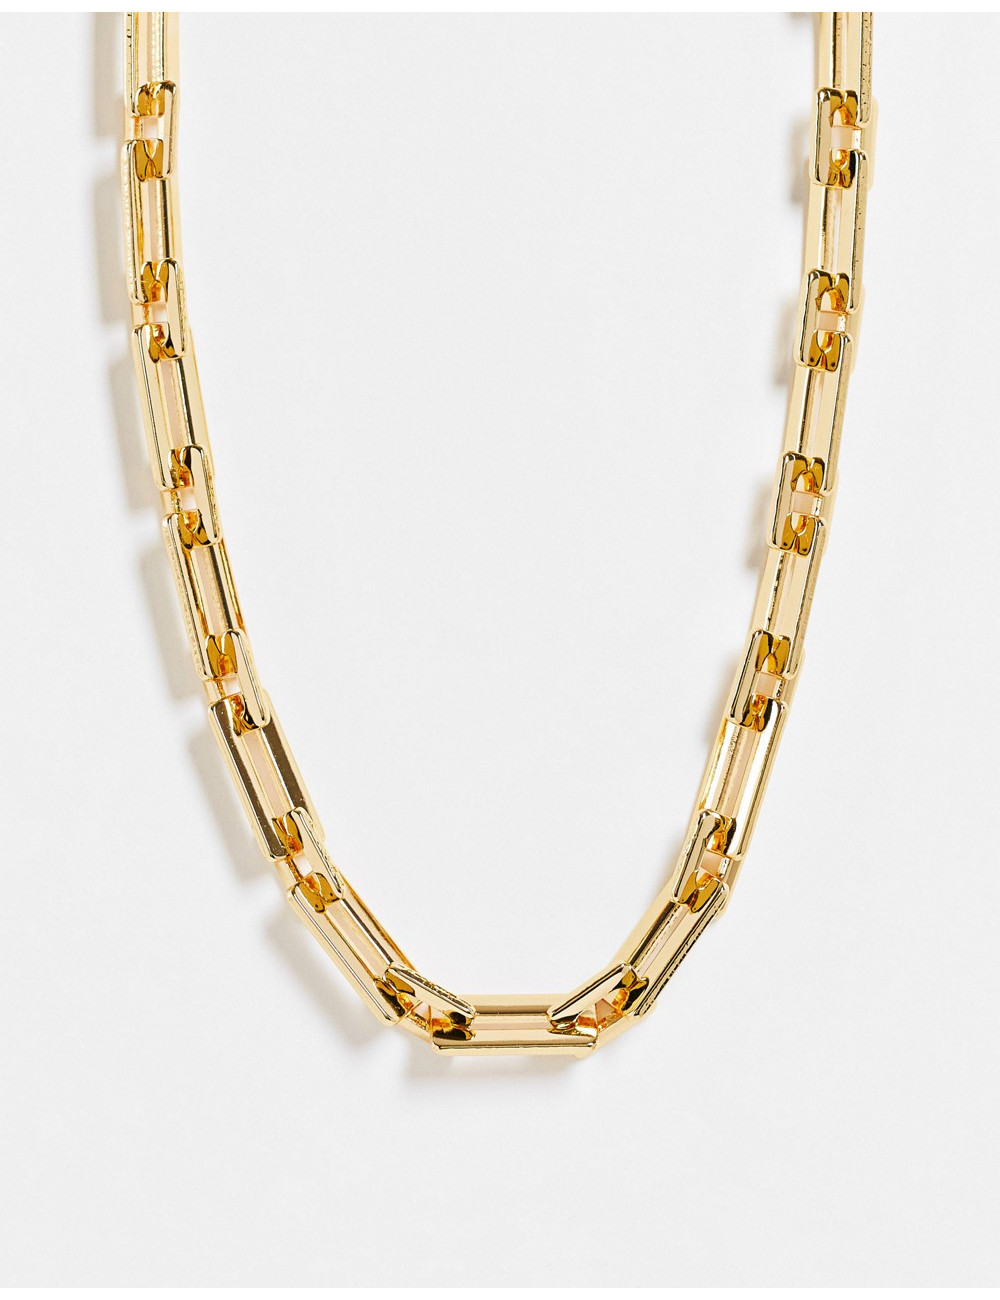 Mango chain link necklace...